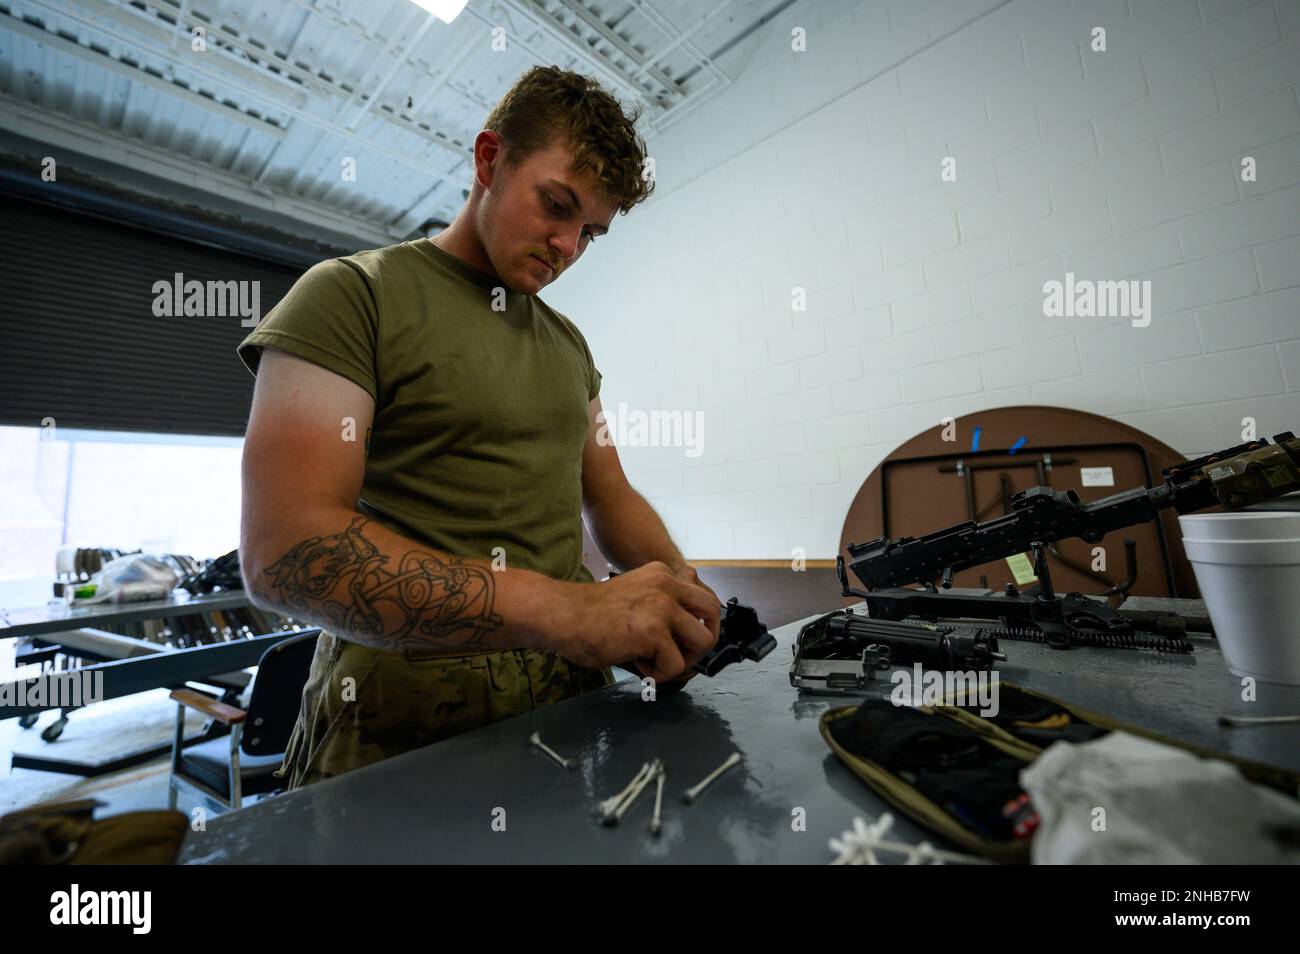 A New Jersey Army National Guard Soldiers from Bravo Company, 1st Battalion, 114th Infantry Regiment, conducts weapons maintenance at the Freehold National Guard Armory in Freehold, New Jersey, July 28, 2022. The Soldiers are cleaning their weapons after returning from the eXportable Combat Training Capability (XCTC) exercise, where more than 2,500 Soldiers participated in training event held in Fort Drum, New York, which enables brigade combat teams to achieve the trained platoon readiness necessary to deploy, fight, and win. Stock Photo